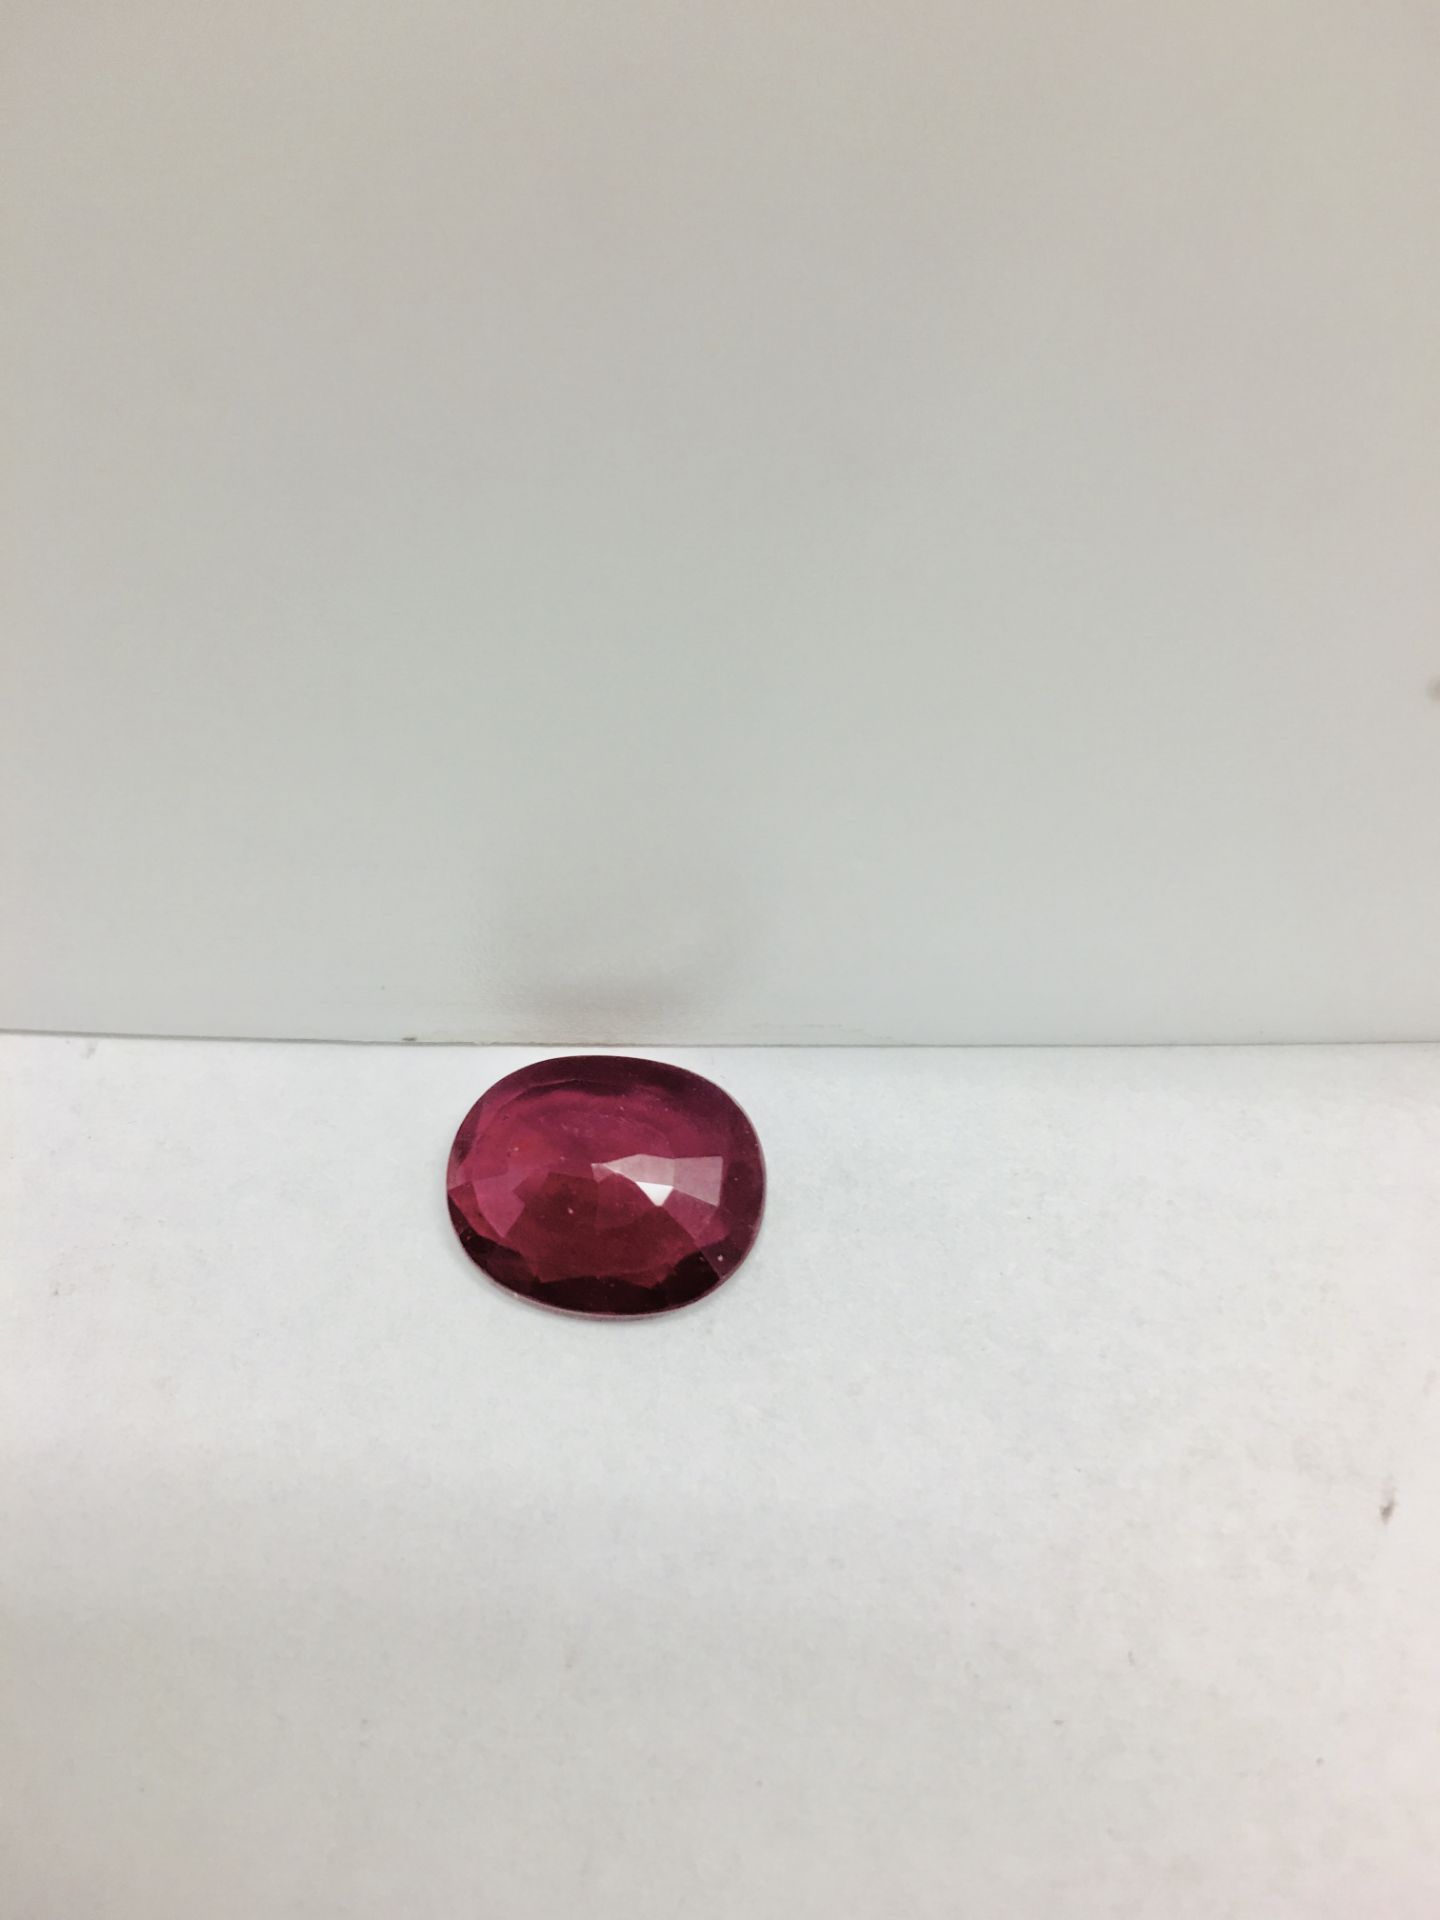 5.17ct ruby,Enhanced by Frature,good clarity and colour,12mmx10mm ,valued at 800 - Image 2 of 2